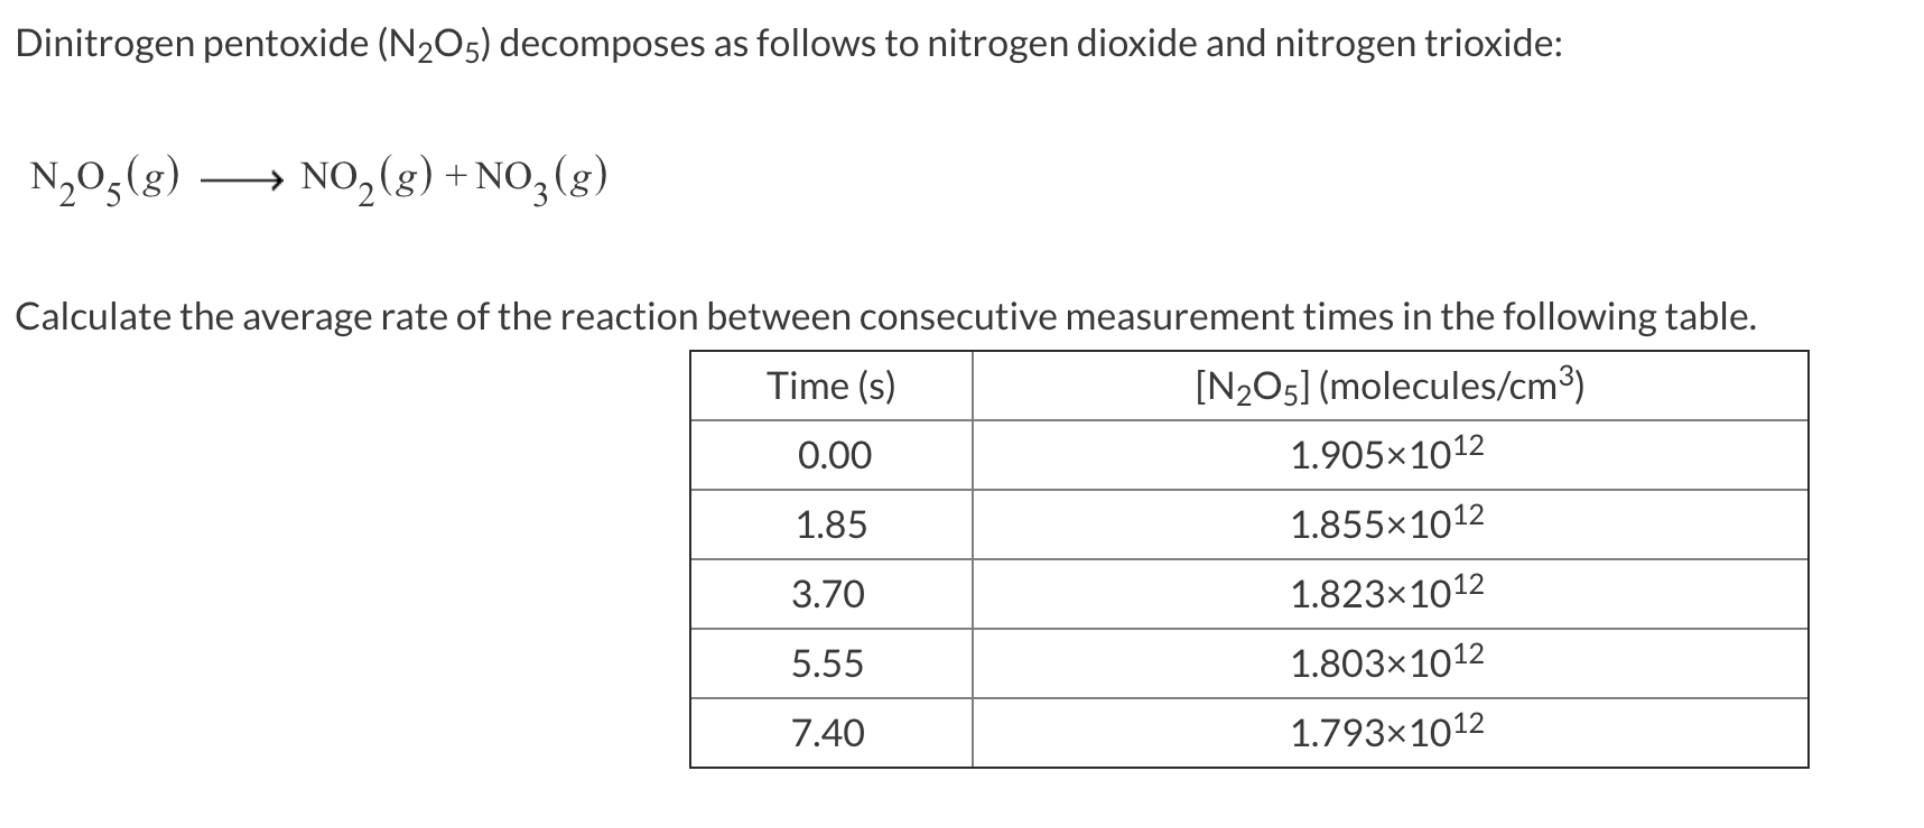 Dinitrogen pentoxide (N2Os) decomposes as follows to nitrogen dioxide and nitrogen trioxide:
N20,gNO2)+NO3(g)
Calculate the average rate of the reaction between consecutive measurement times in the following table.
[N205] (molecules/cm3)
1.905x1012
1.855x1012
1.823x1012
1.803x1012
1.793x1012
Time (s)
0.00
1.85
5.55
7.40
